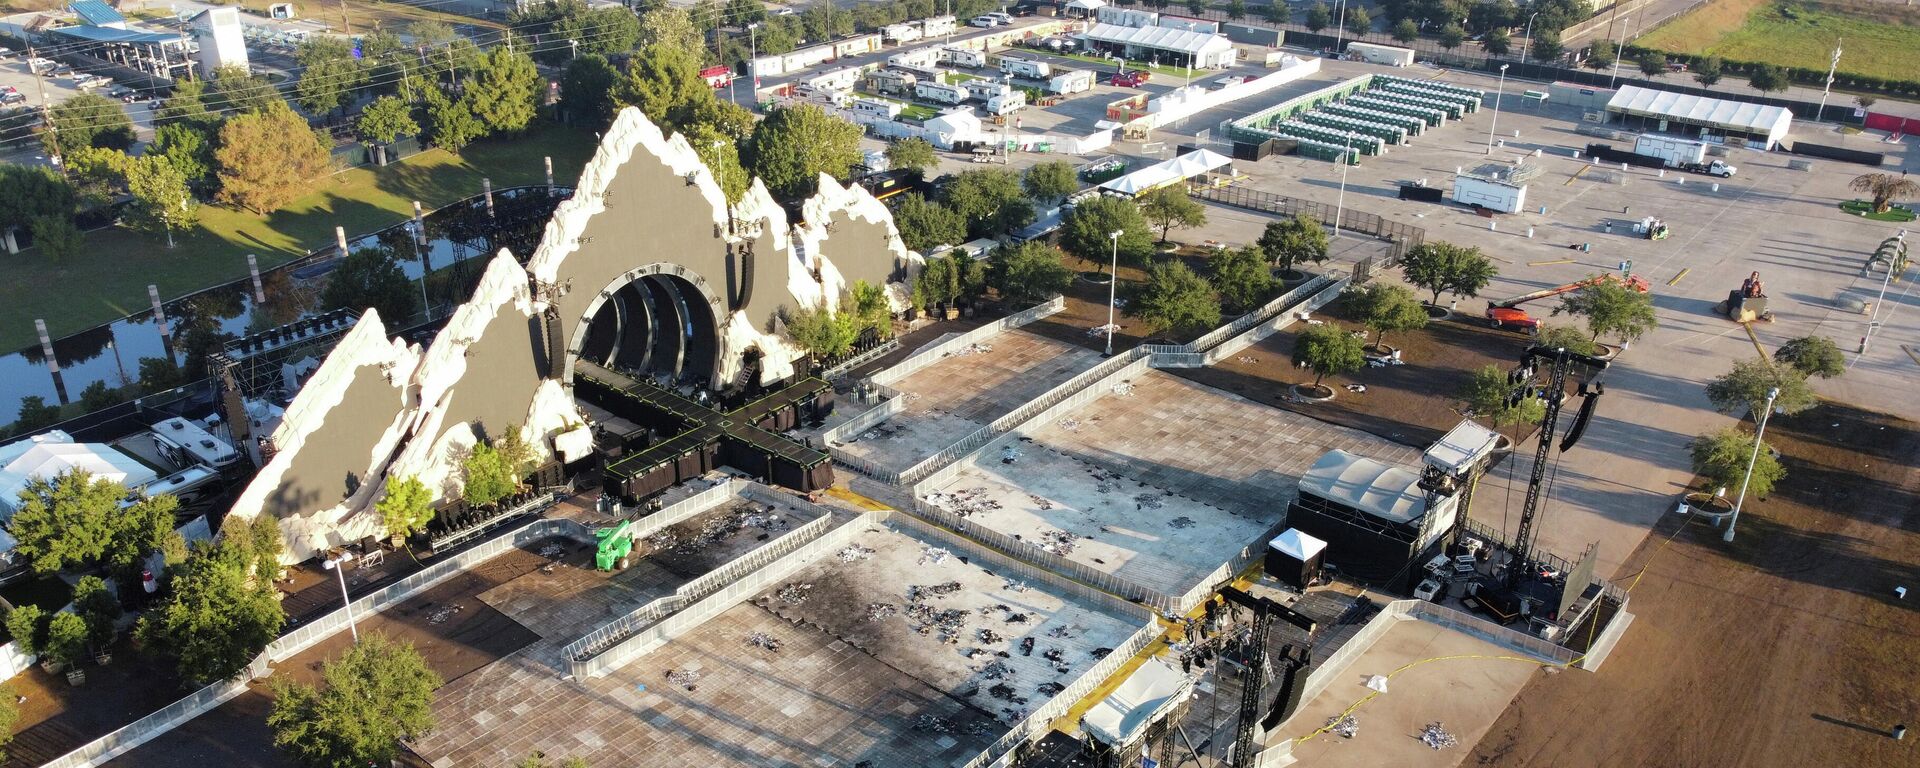 The empty stage at the 2021 Astroworld Festival is seen days after a stampede killed several concertgoers in Houston, Texas, U.S., November 7, 2021 - Sputnik International, 1920, 15.11.2021